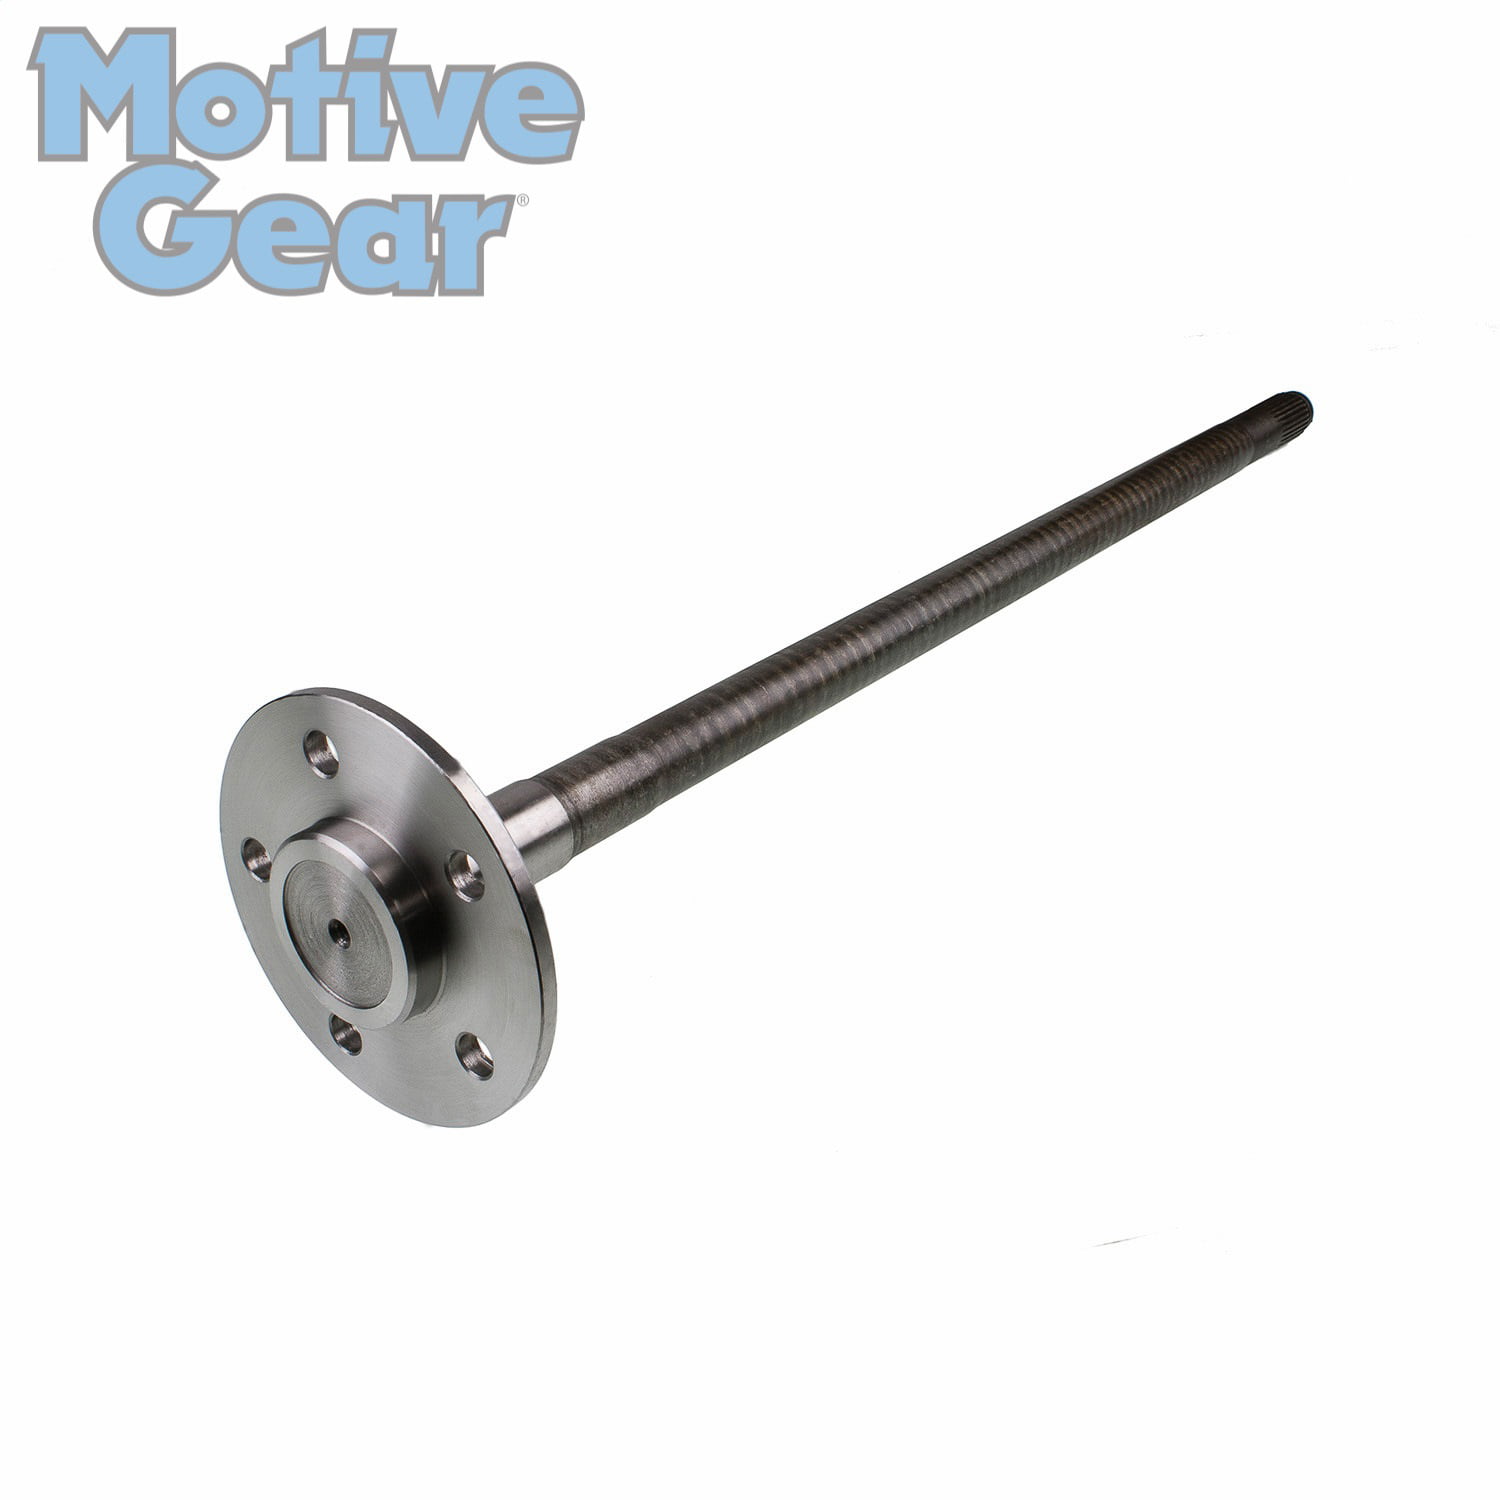 Motive Gear MG7430 7.5/8.8 Axle Shaft for Ford Style 